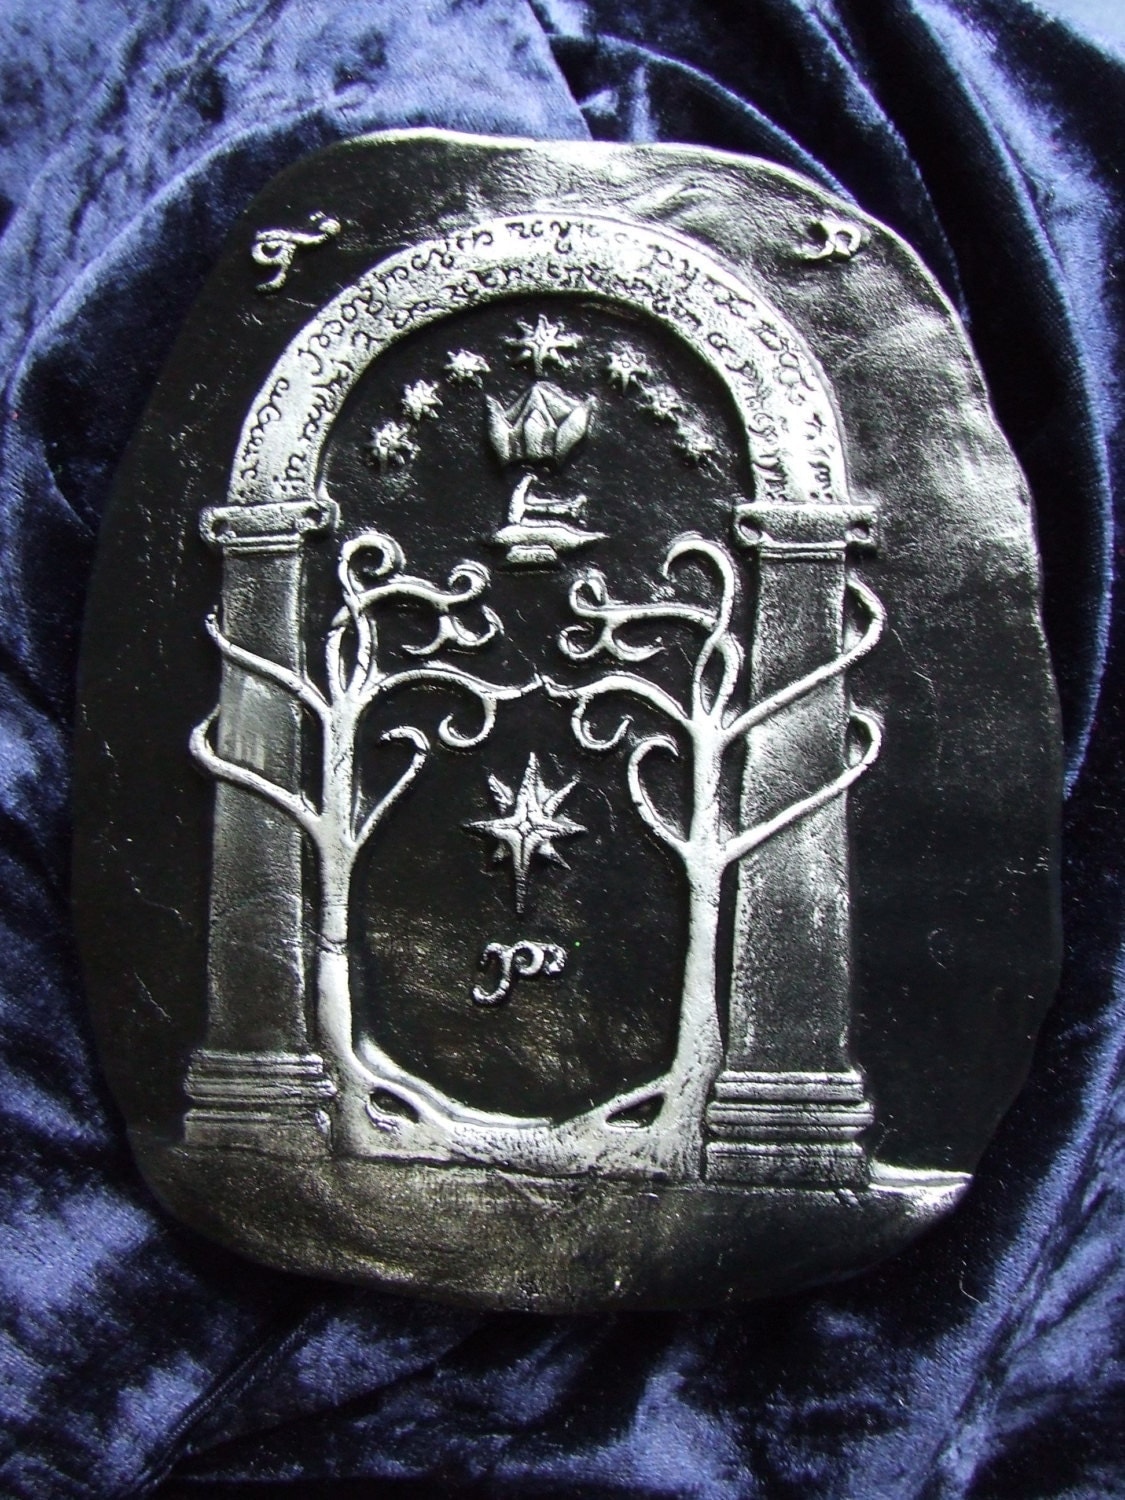 Lord of the Rings Mines of Moria door ceramic display by Fireverse